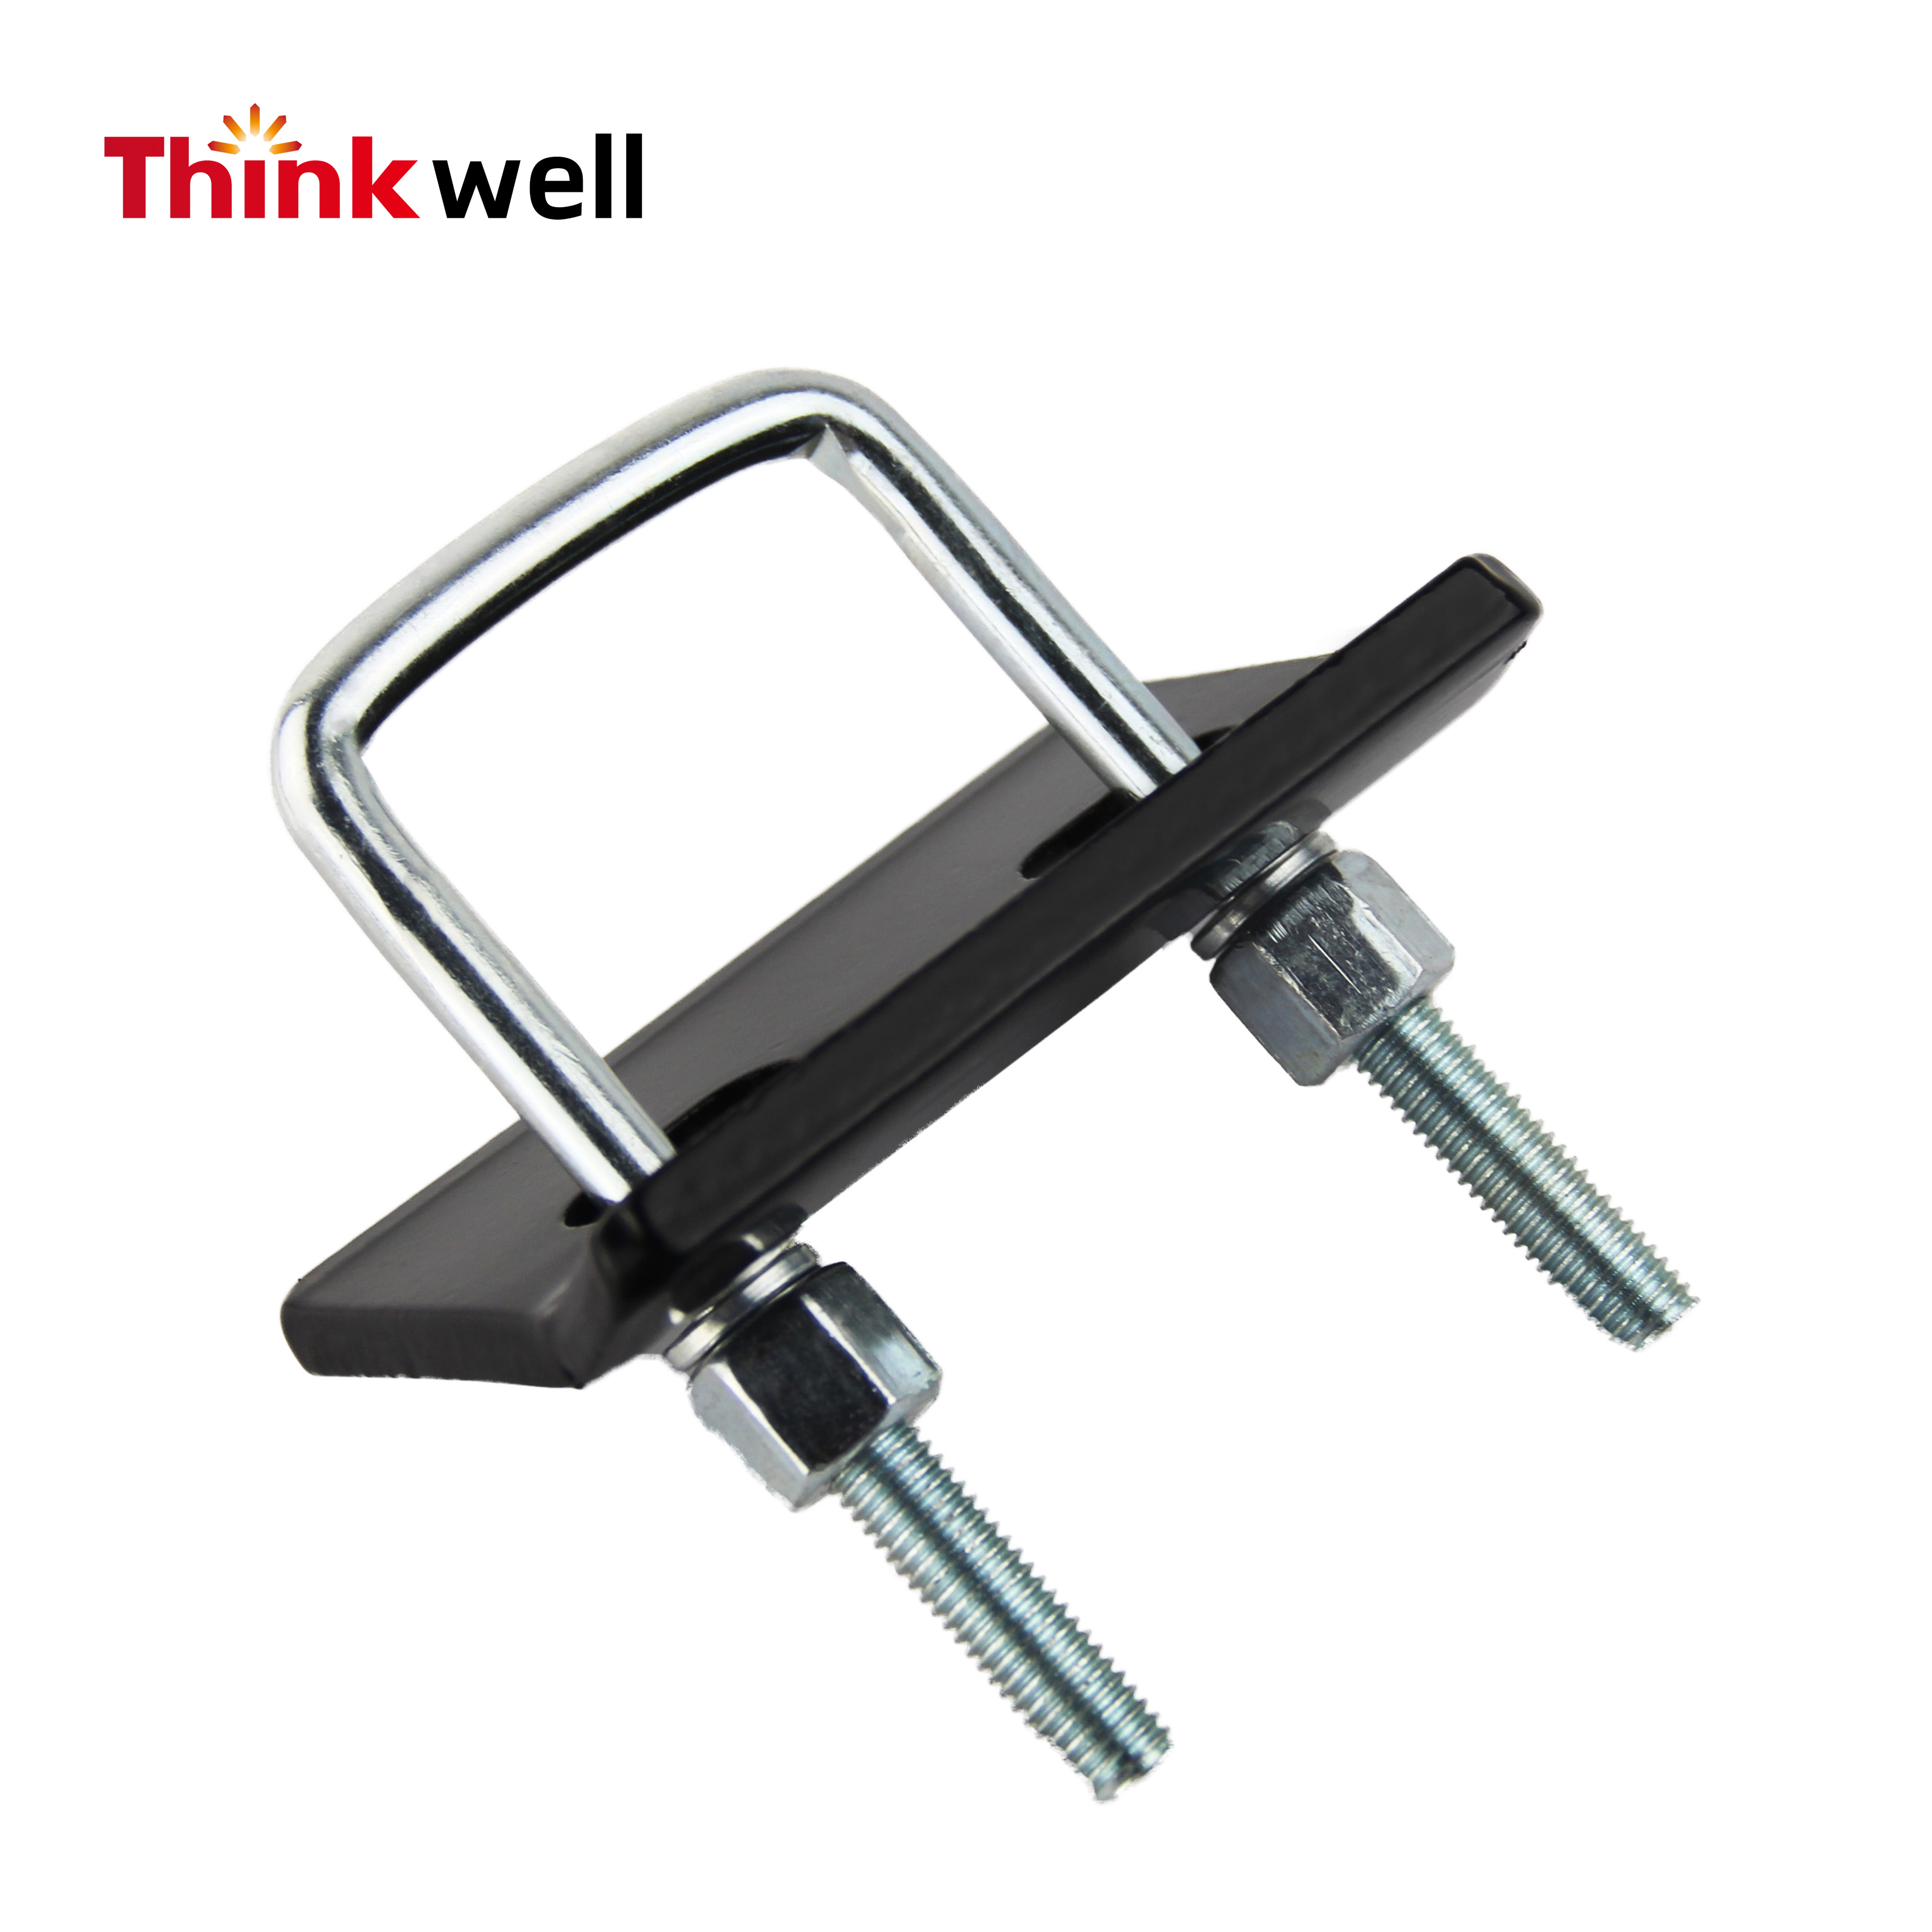 Boat Trailer Tow Clamp Receiver Hitch Tightener